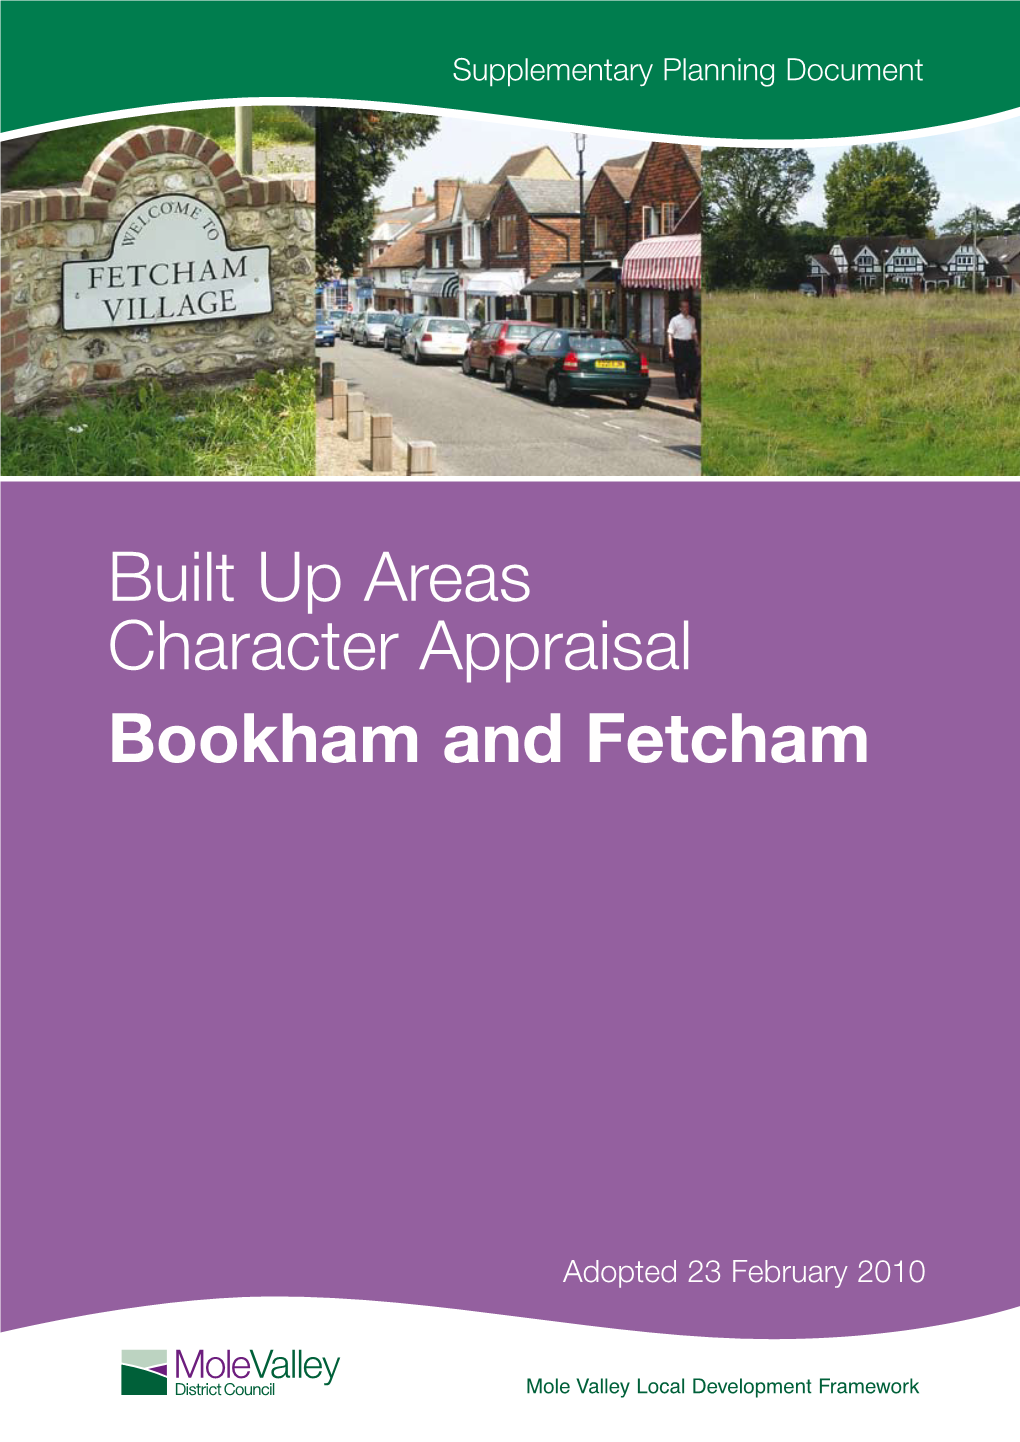 Built up Areas Character Appraisal Bookham and Fetcham